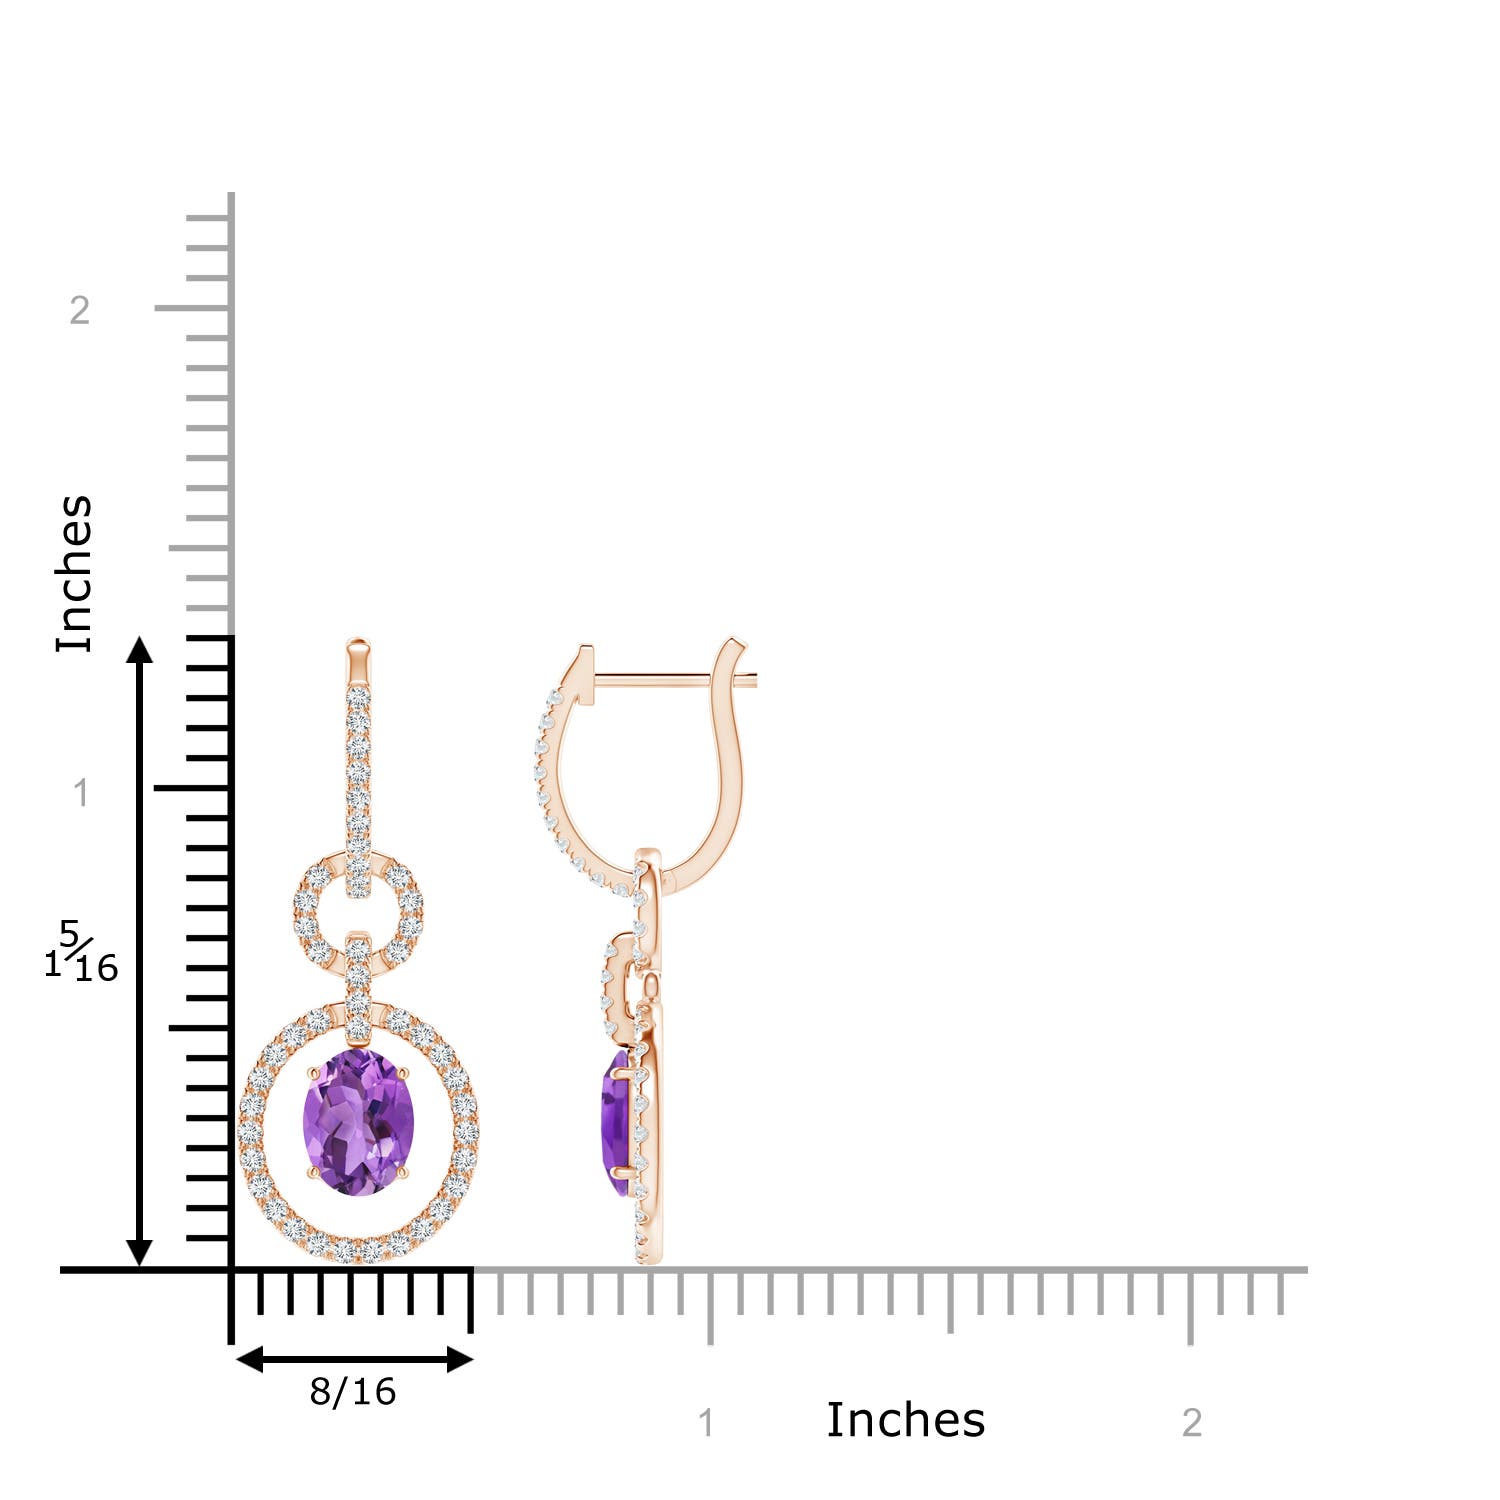 AA - Amethyst / 3.08 CT / 14 KT Rose Gold